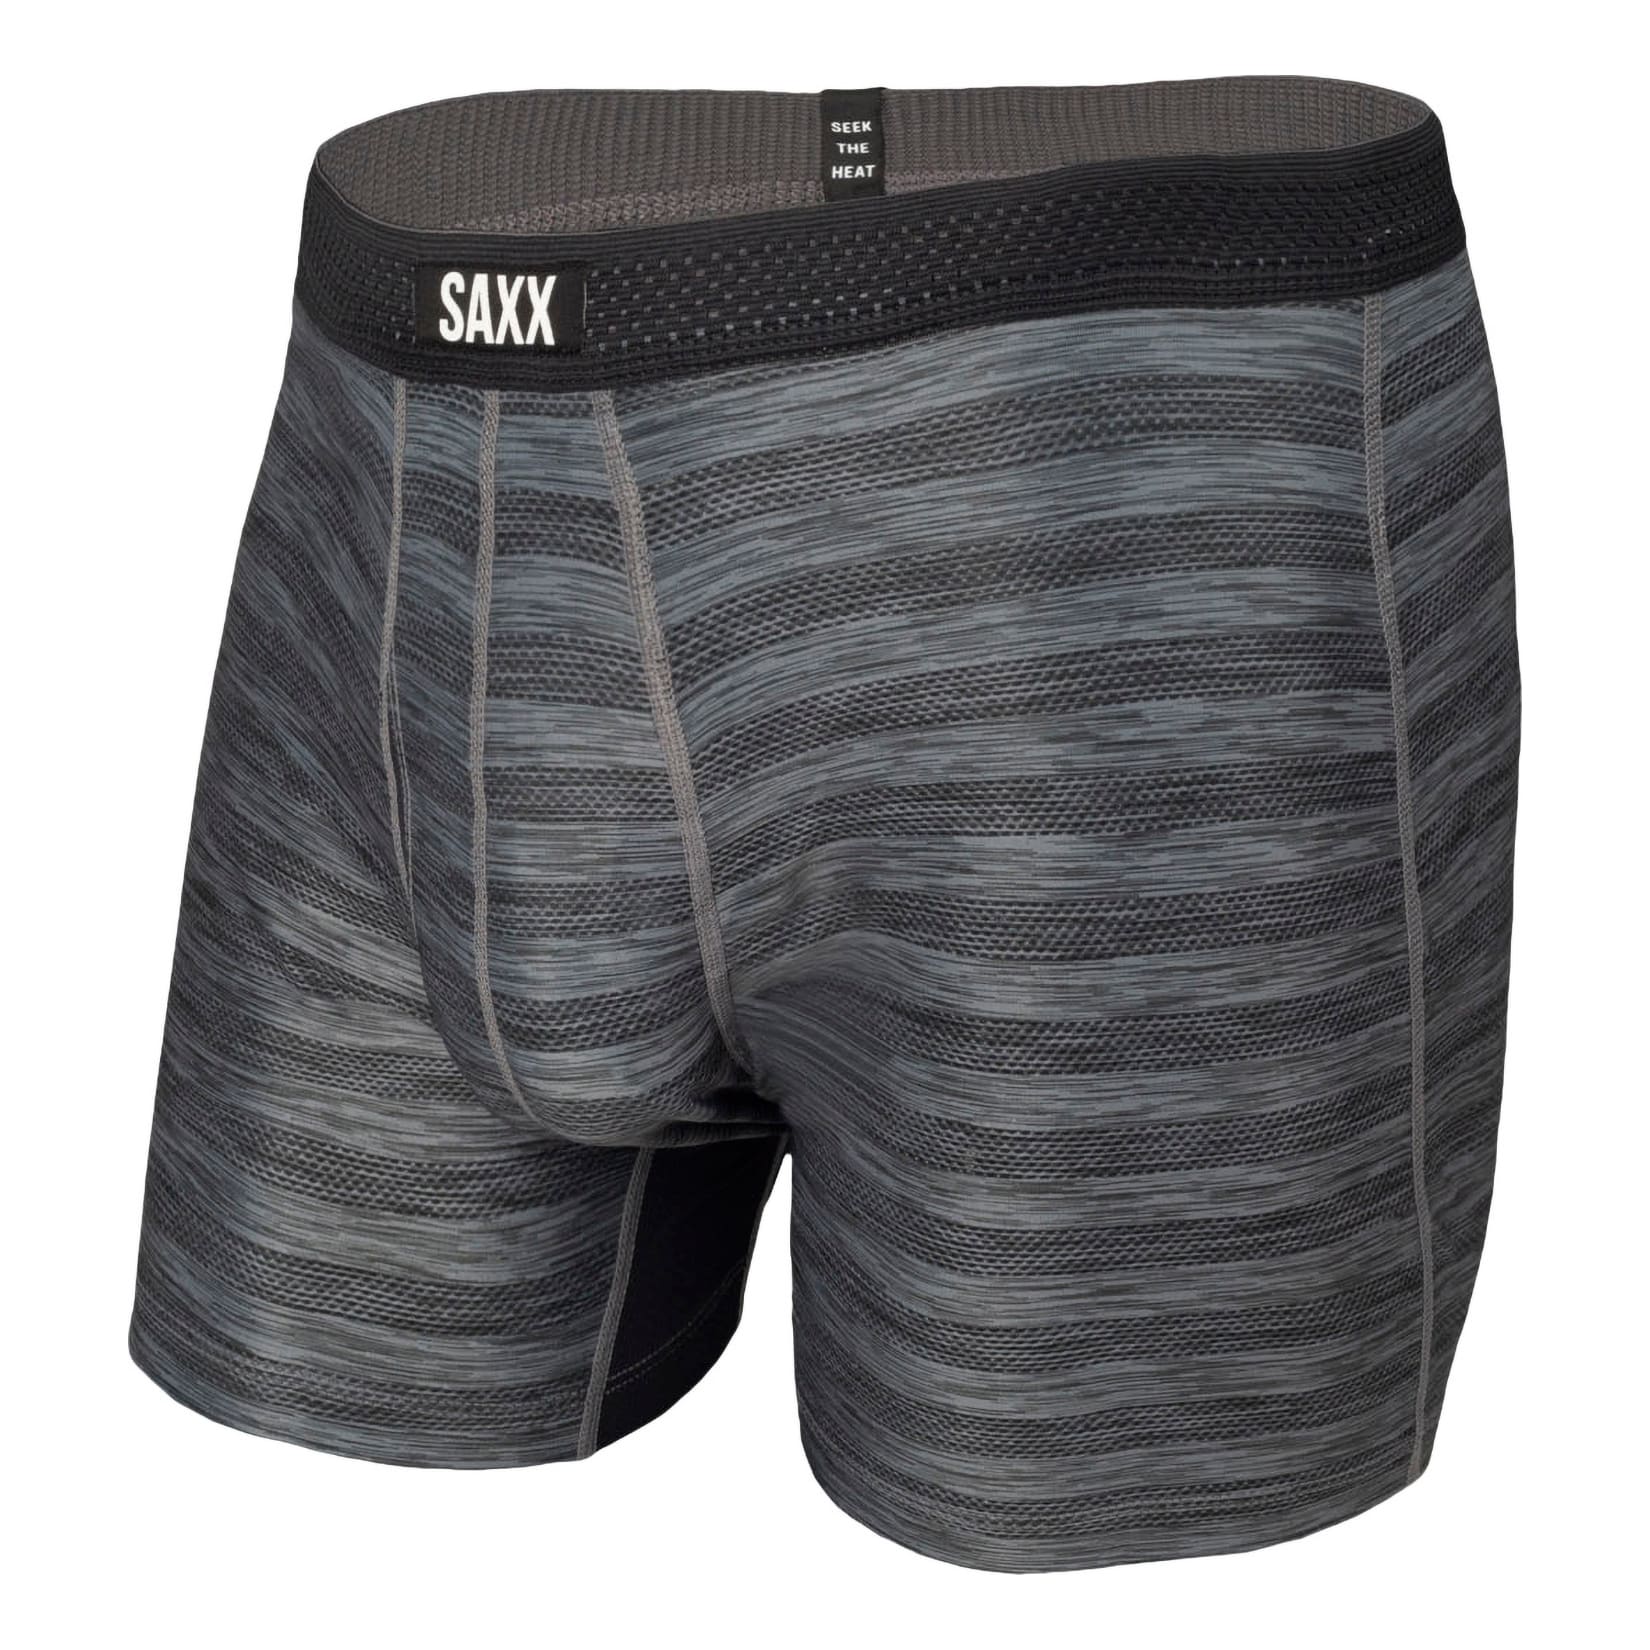 Saxx® Men’s Hot Shot Boxer with Fly - Black Heather